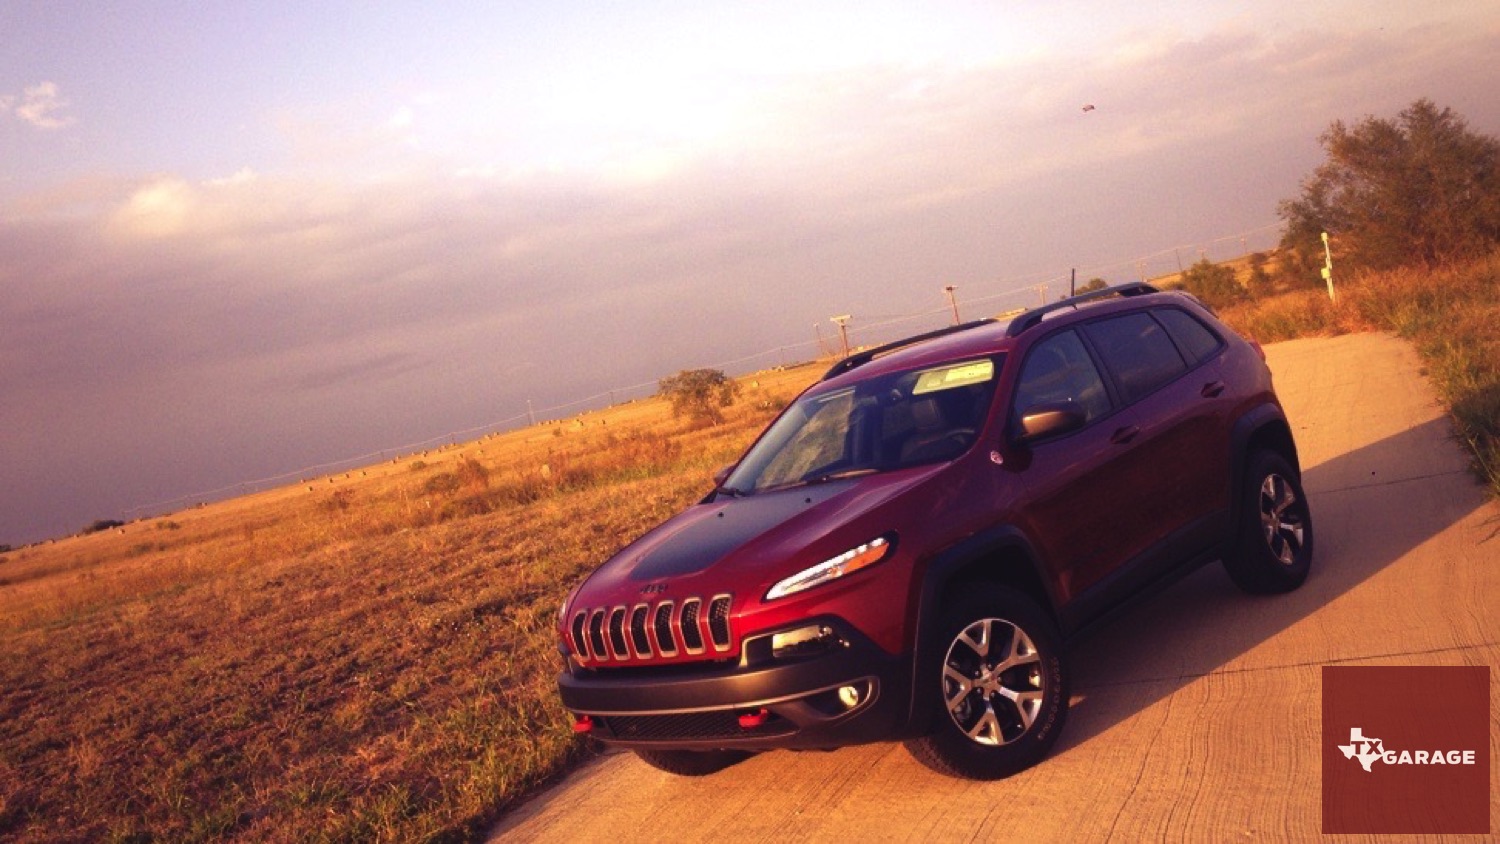 The 2015 Jeep Cherokee Trailhawk by txGarage